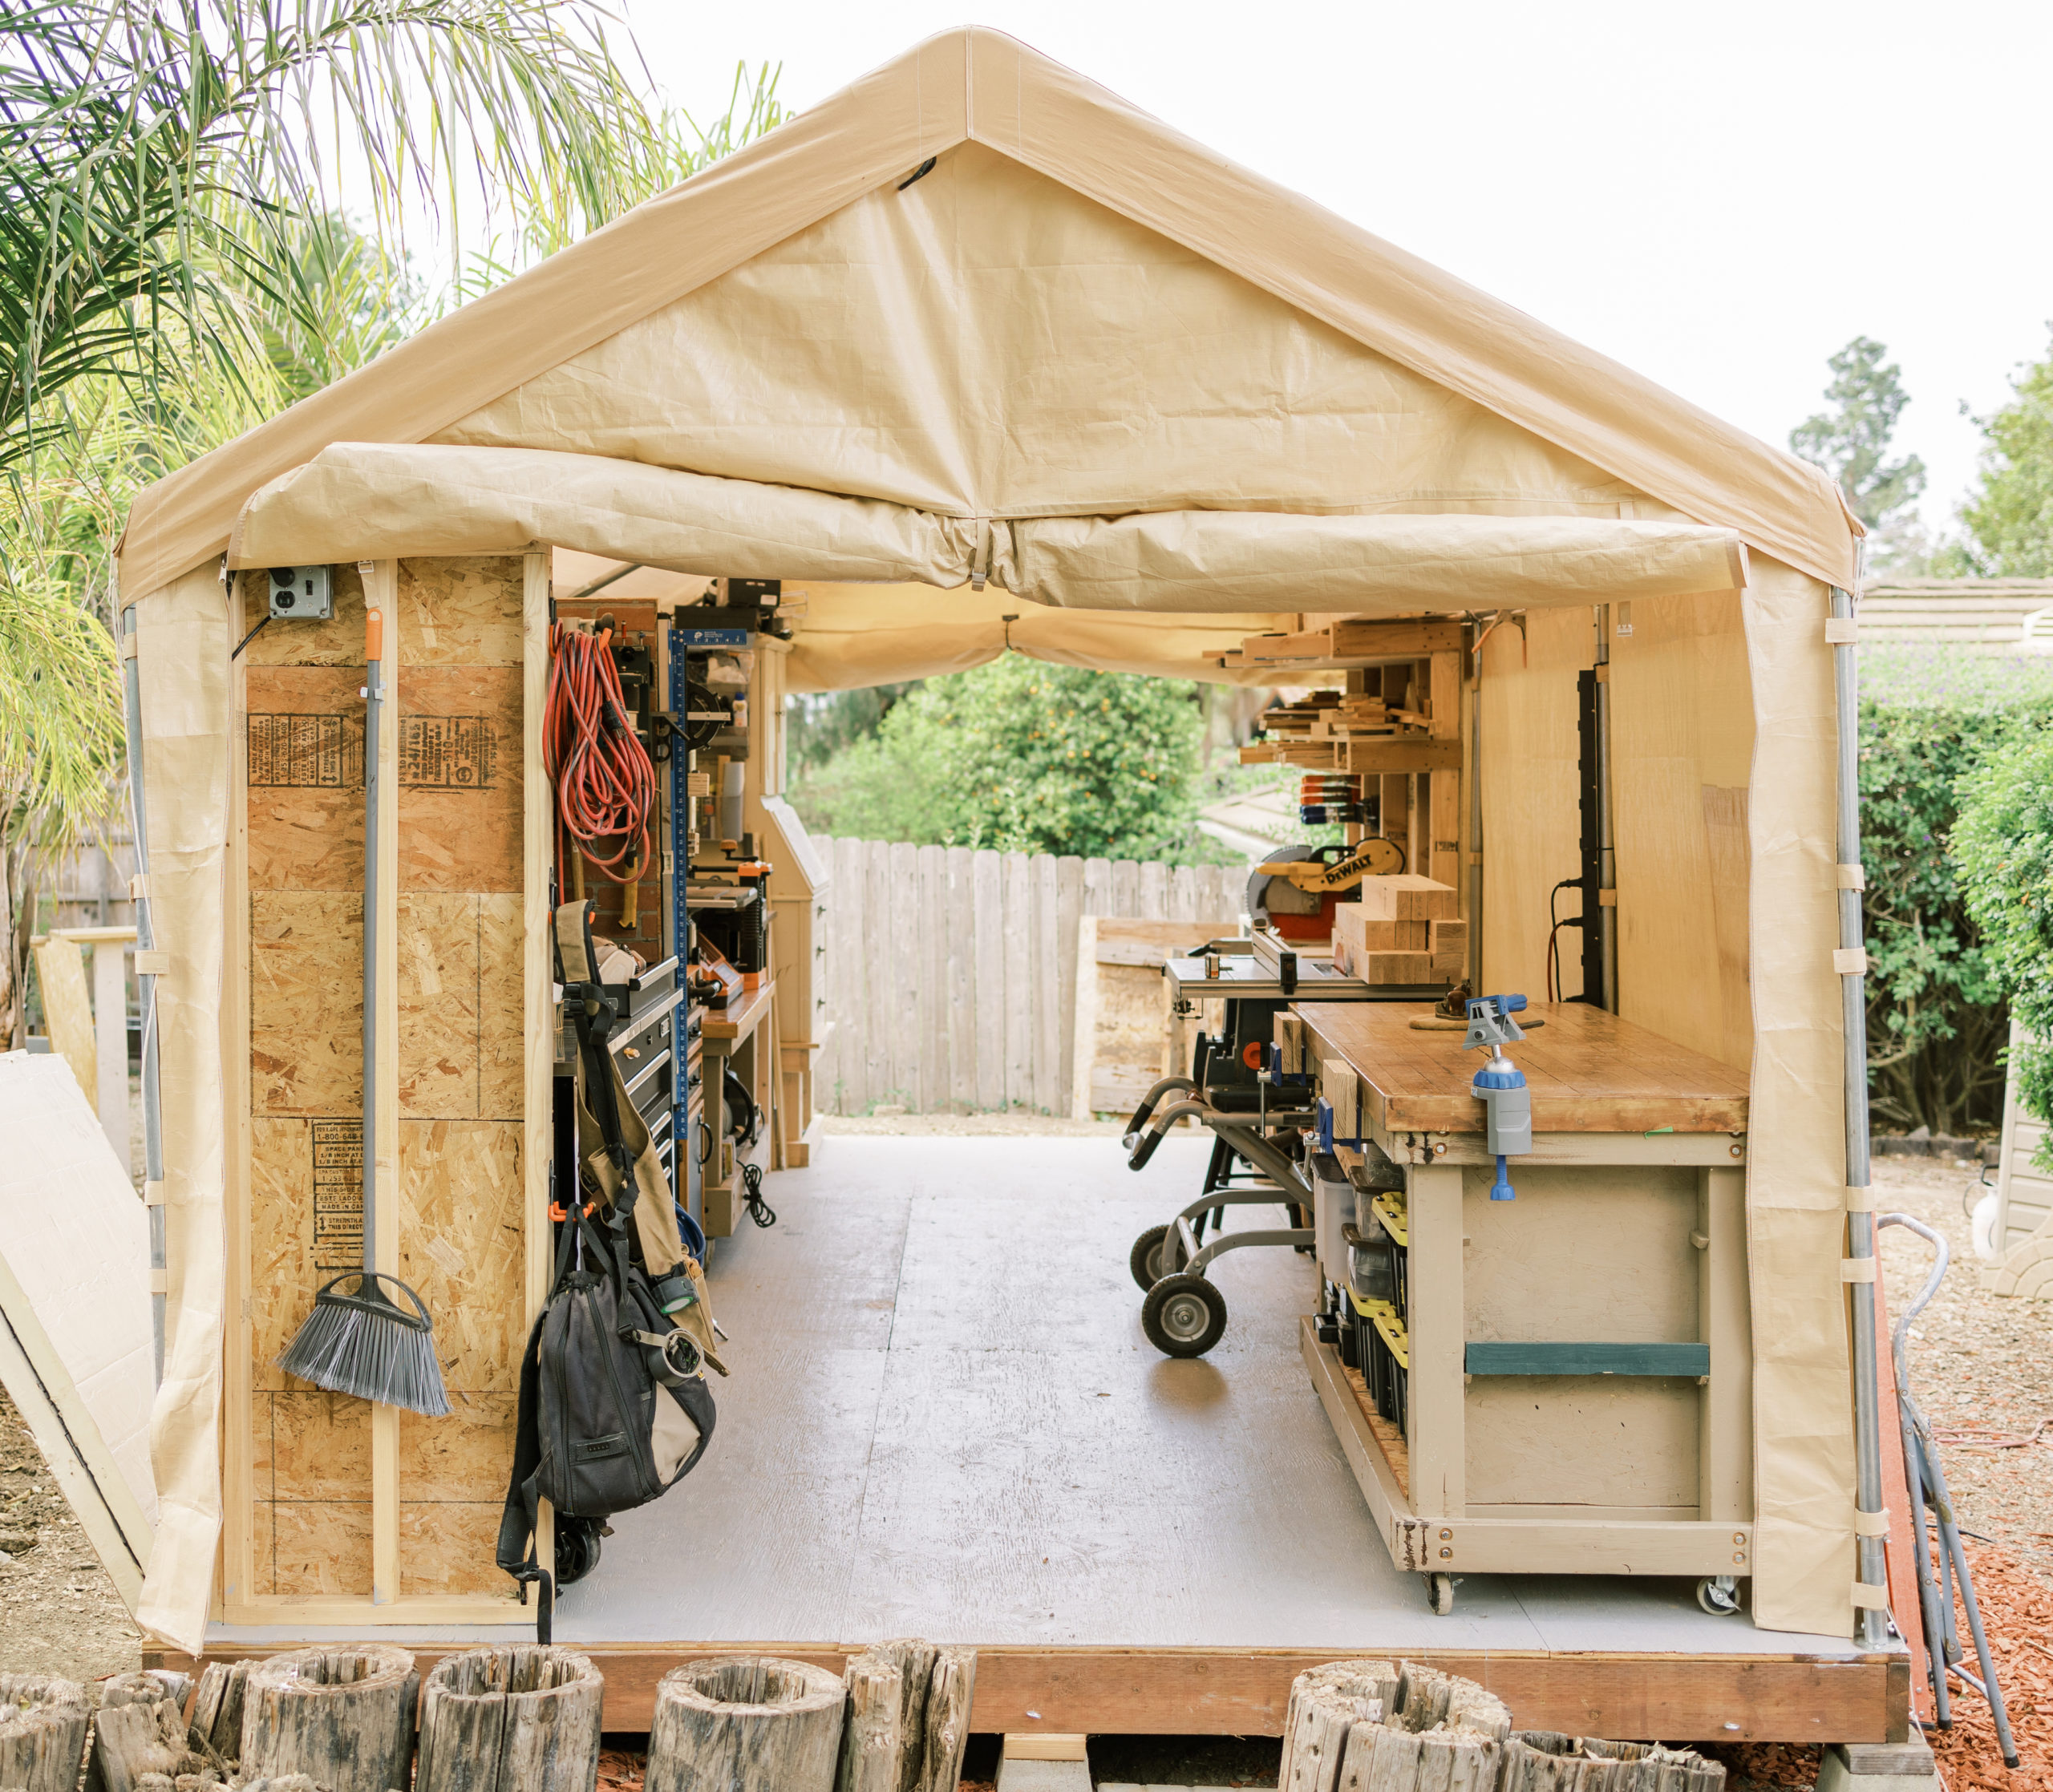 Shop Tour: This Ingenious “Temporary” Woodshop is Made From a Carport Tent